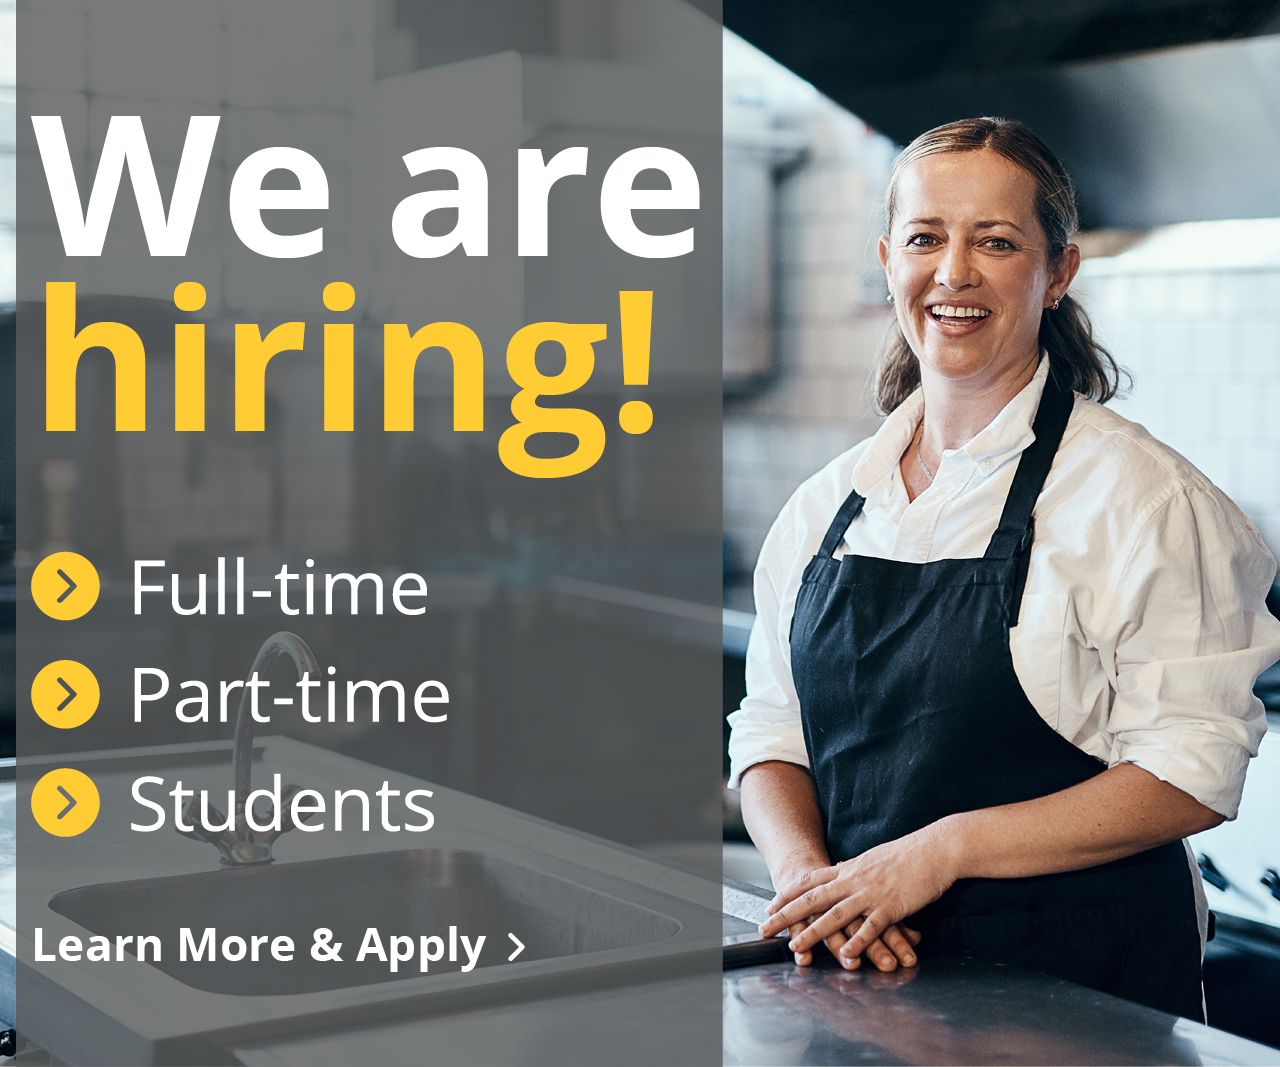 We are hiring! Full-time, part-time, and students. 